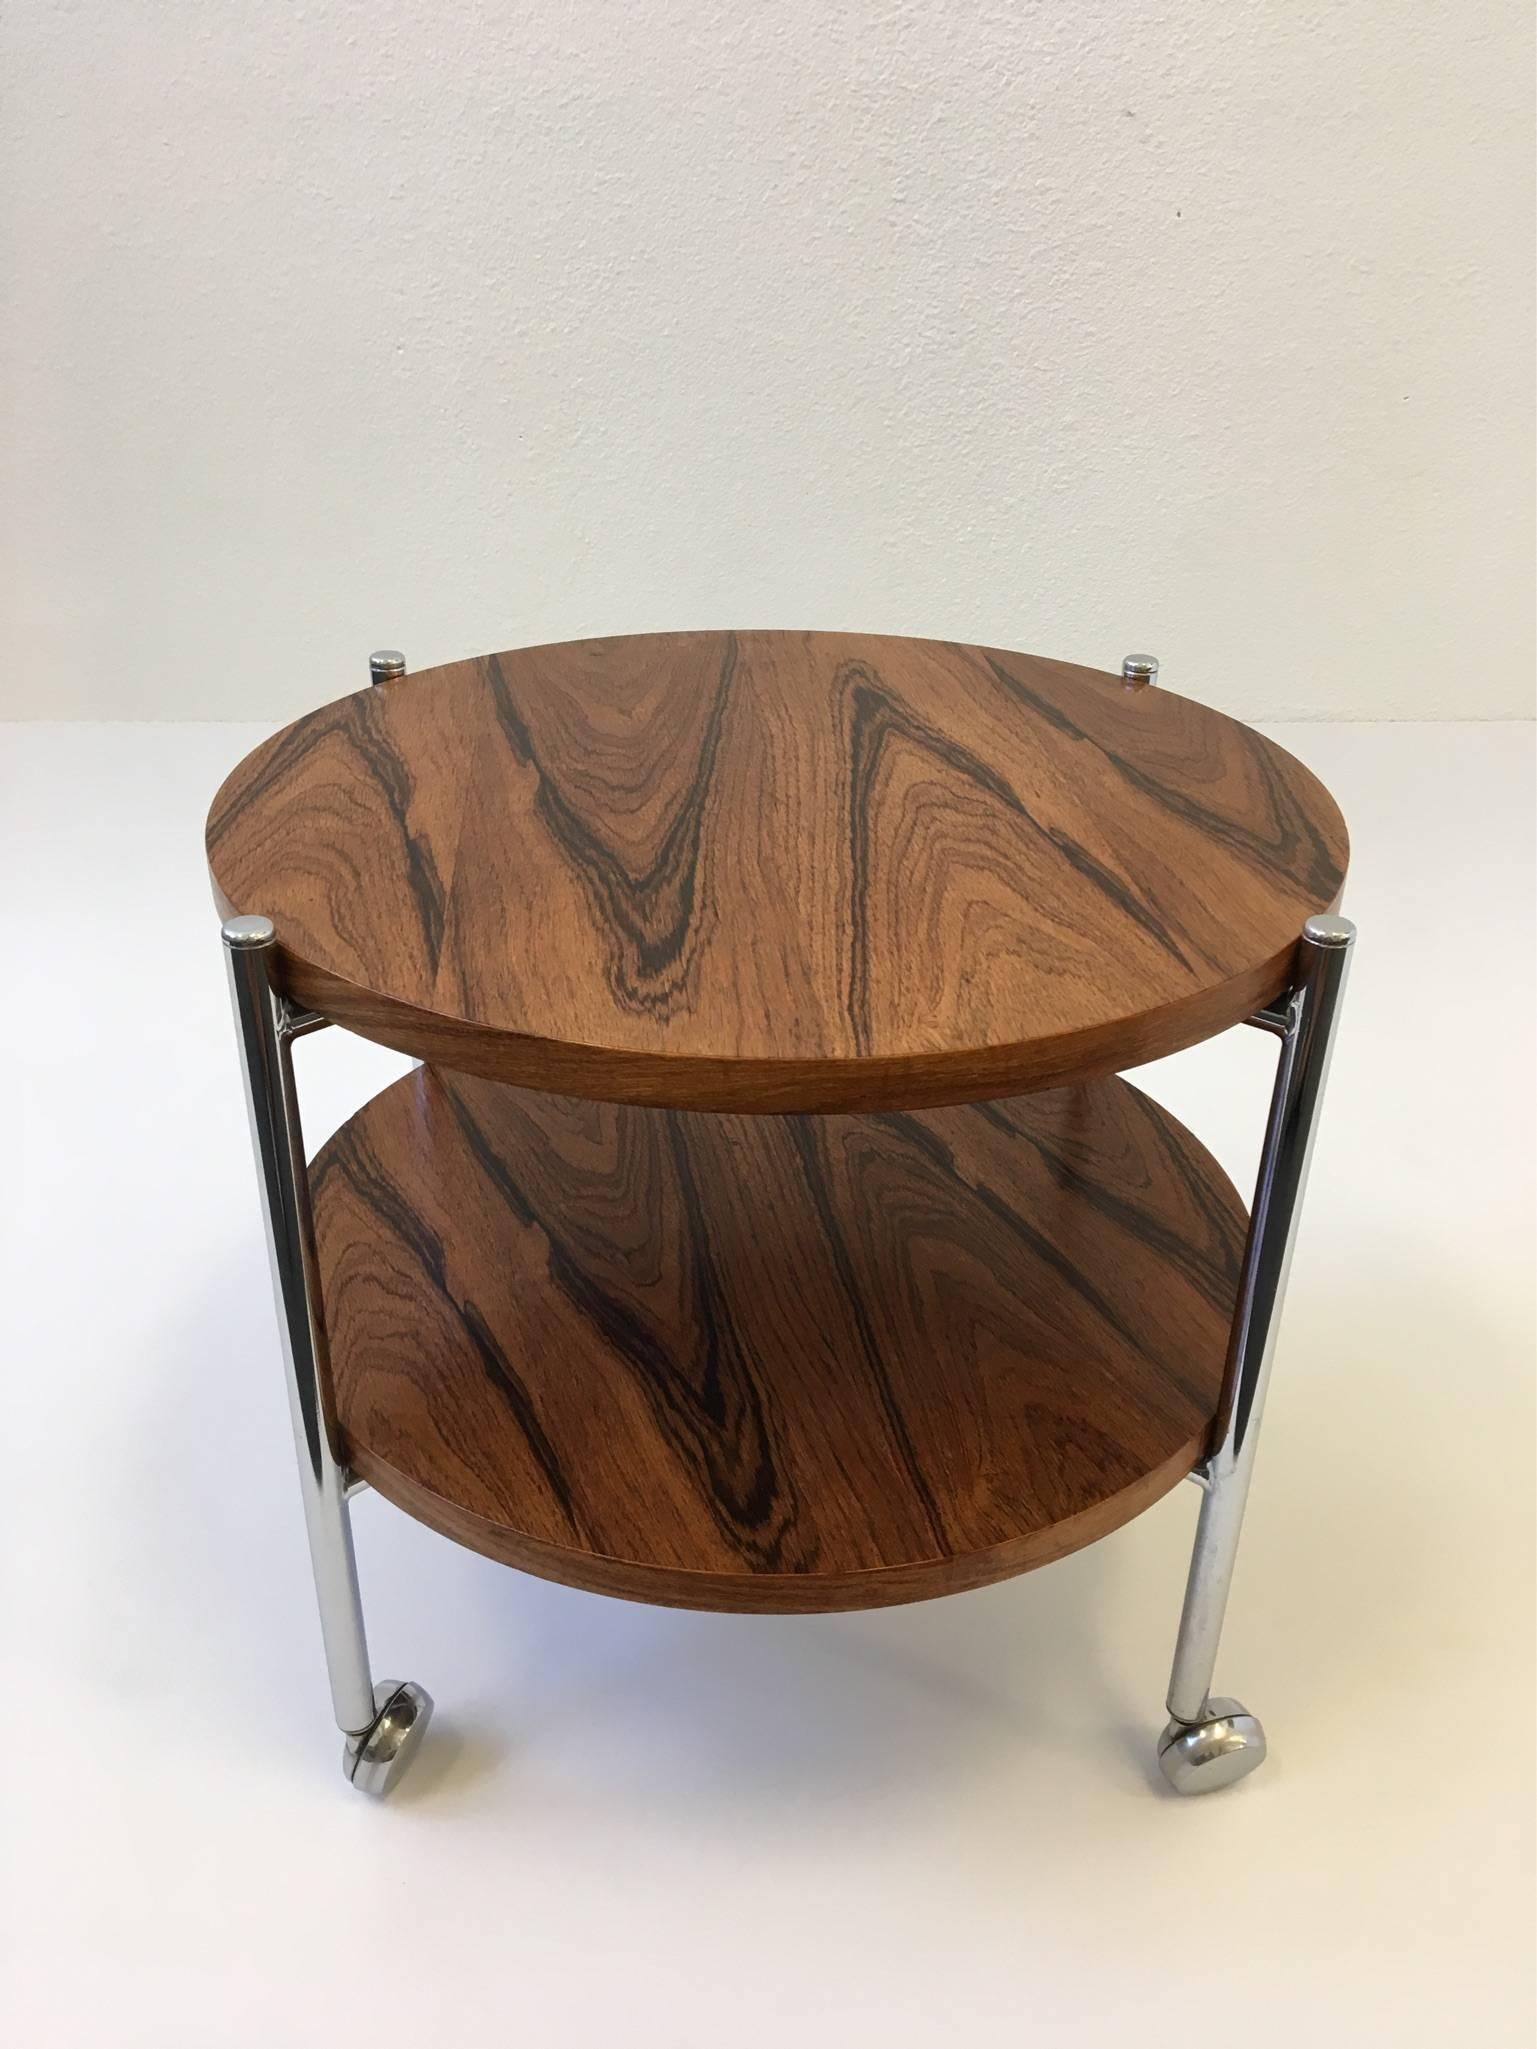 A beautiful two-tier rosewood and polished chrome side table on casters. The wood is press wood with a rosewood veneer. This is in original condition so it has some minor wear. 
Dim: 19